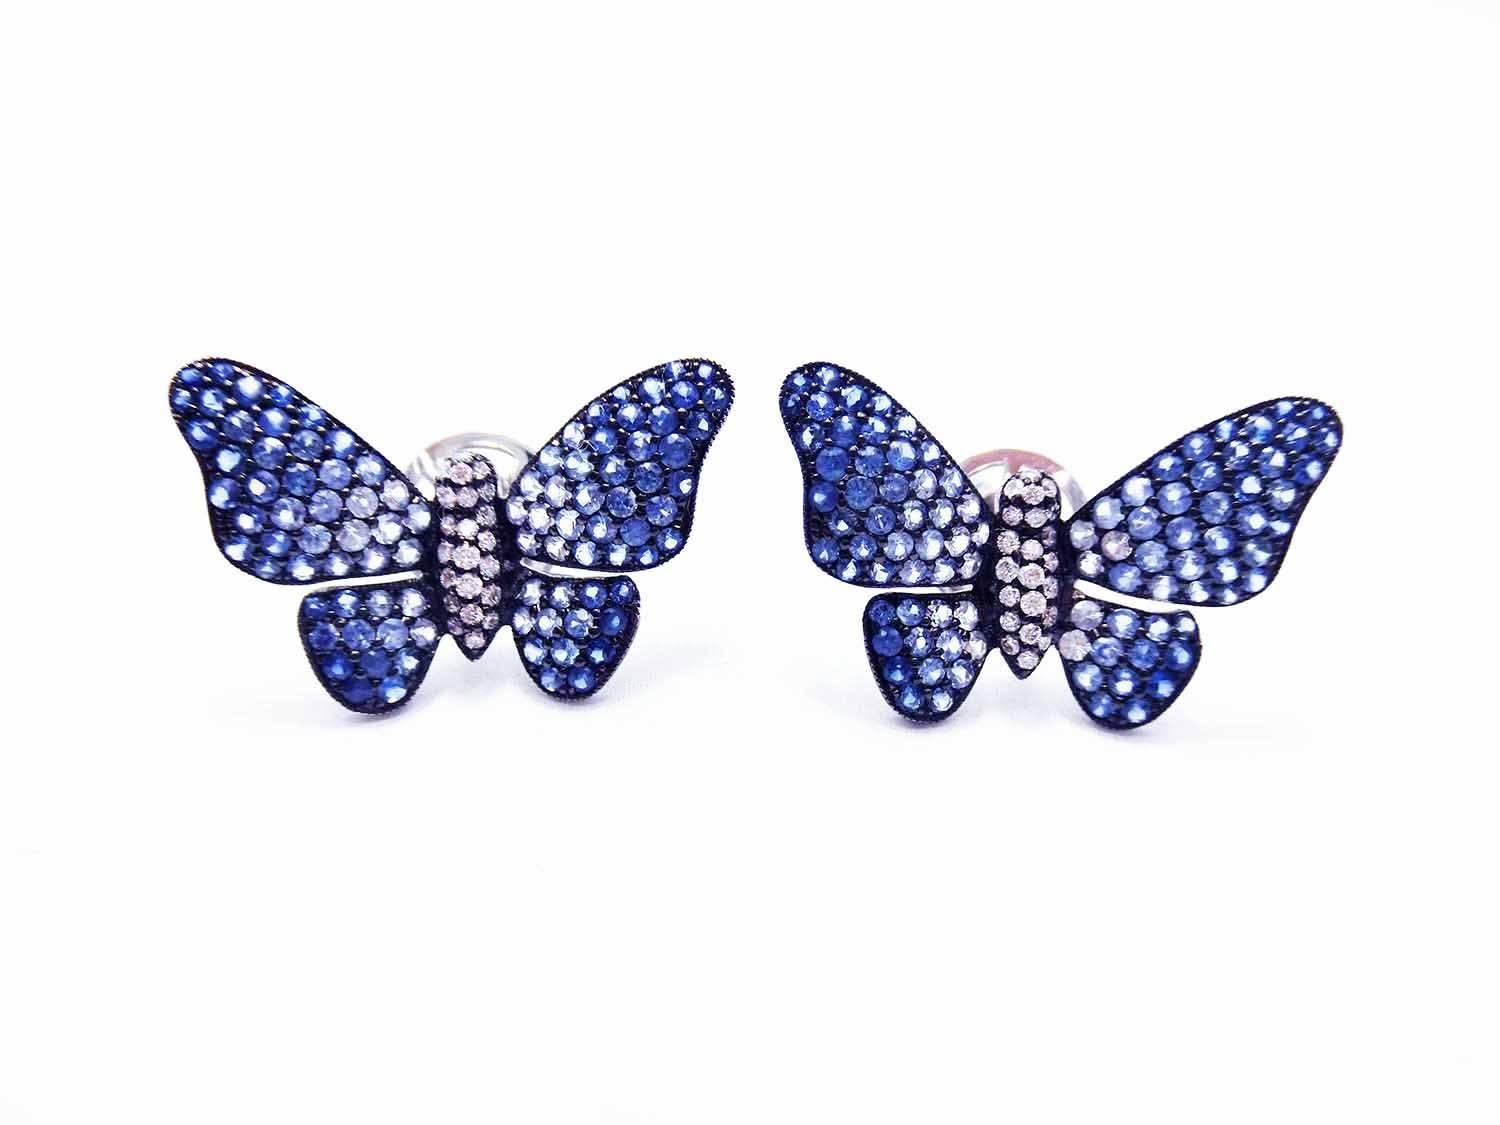 Graduated sapphire in butterfly earrings made in 18k white gold.We graduate  sapphire to make the pieces looking soft and sweet.We make in very detail and high quality of workmanship.
 Sapphire 2.58 ct High quality sapphire
Diamond 0.22 ct H VS